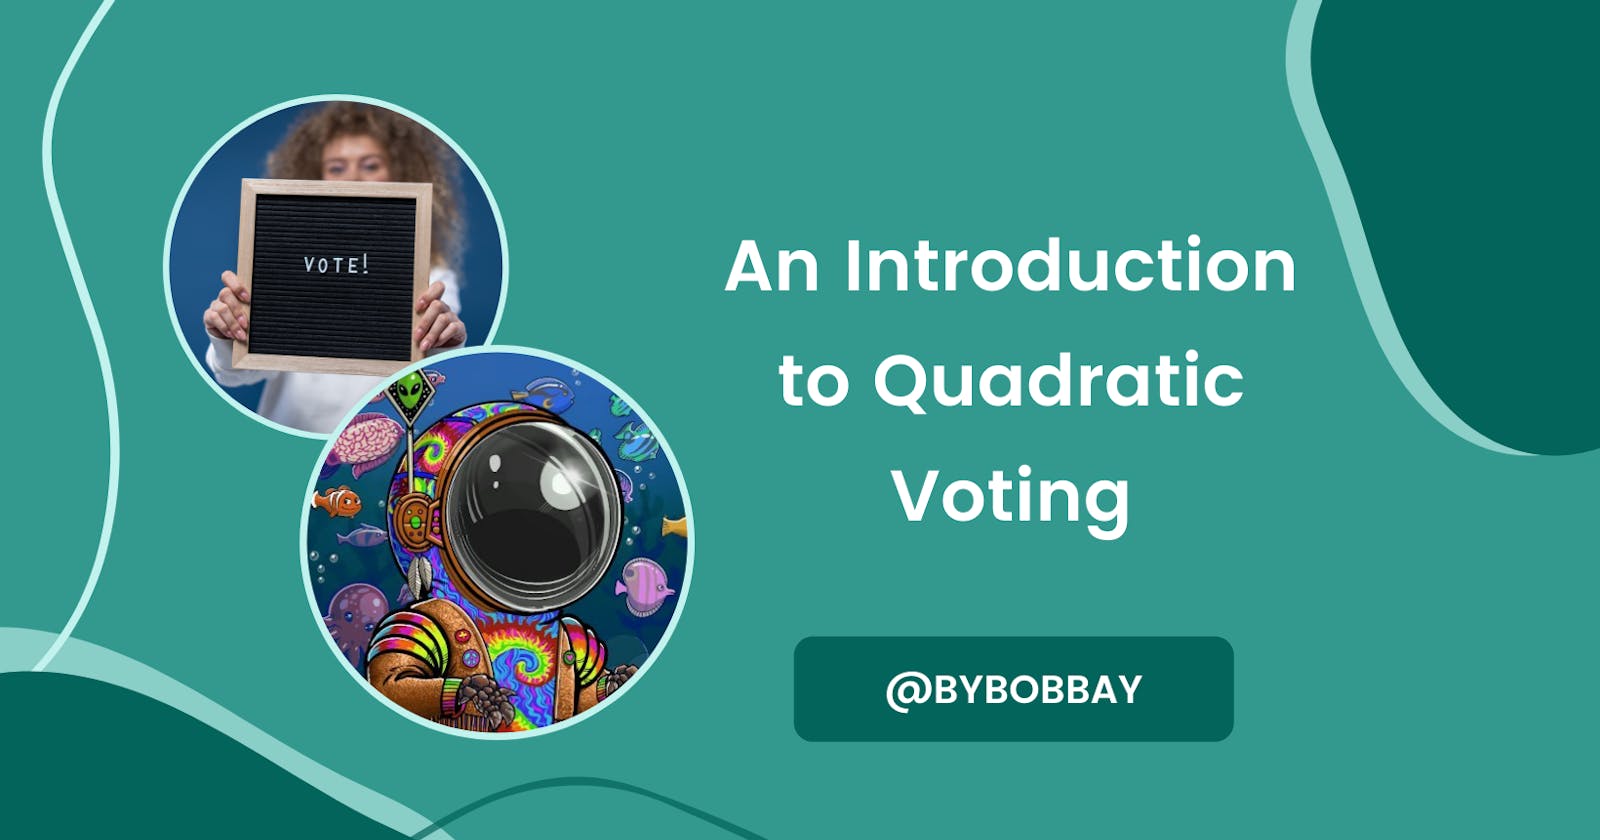 An introduction to quadratic voting